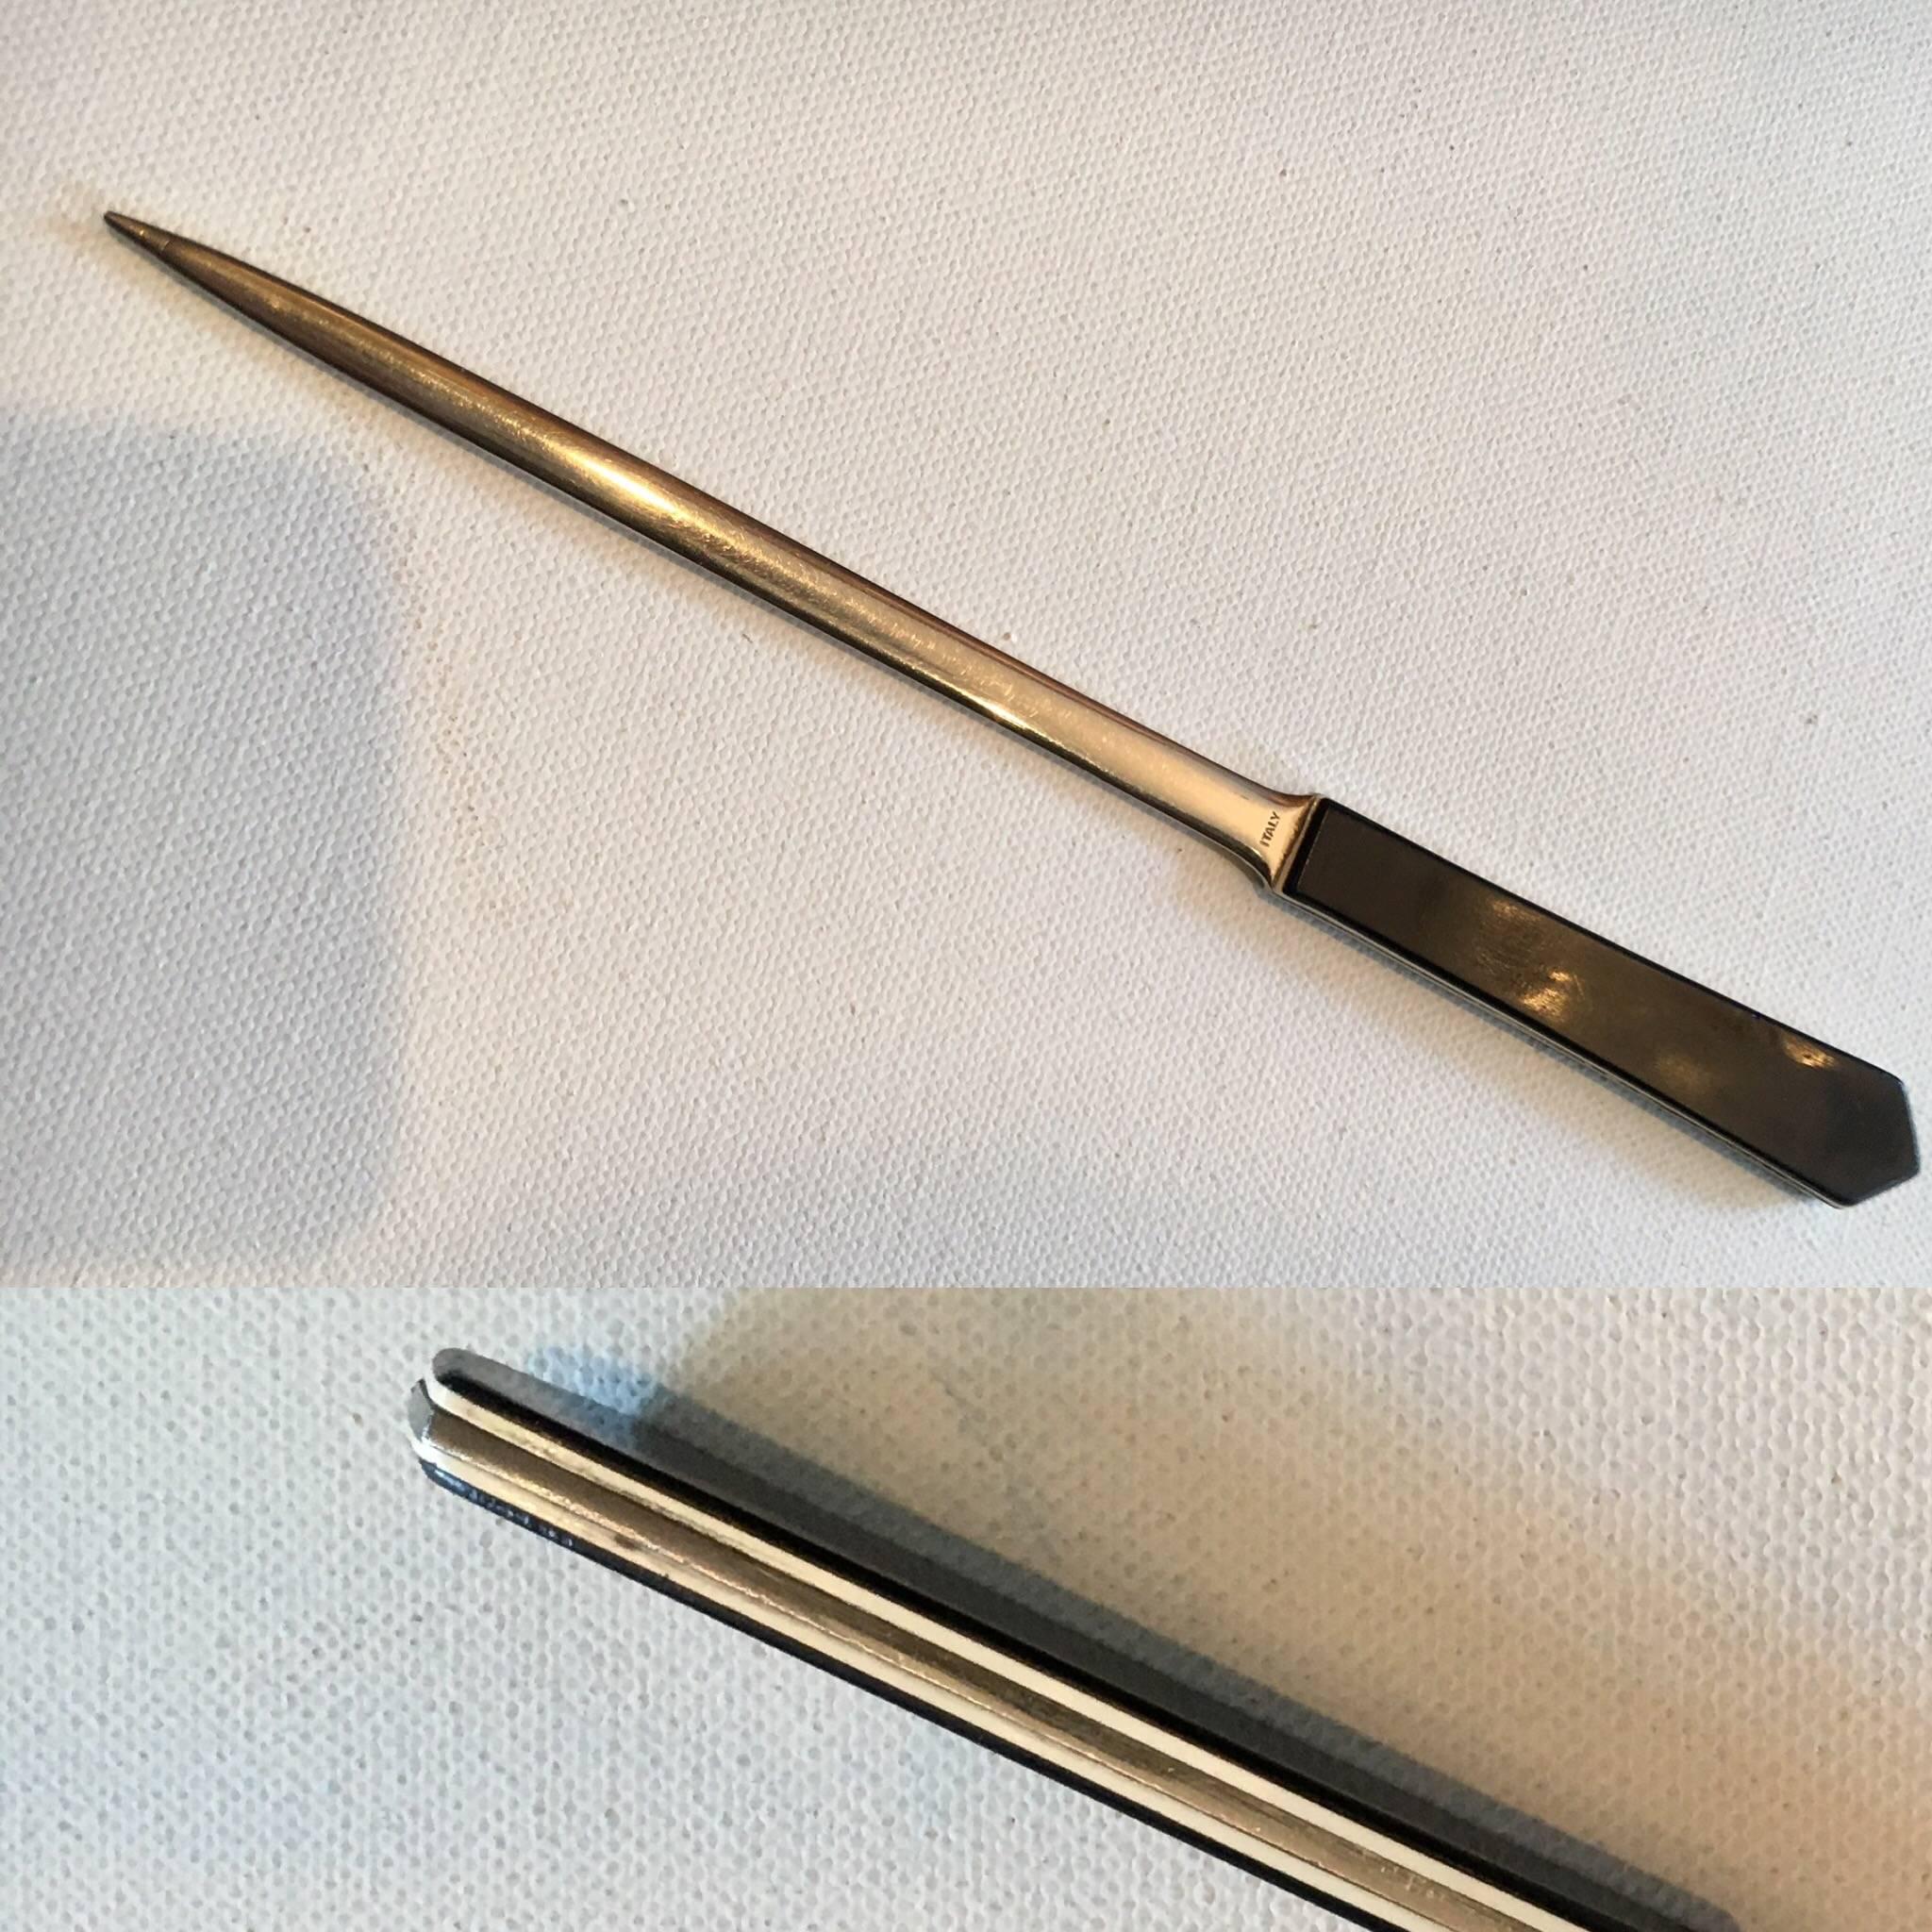 Italian silver and Bakelite letter opener - a lovely addition to your sophisticated desk - the sides are a layered - see detail image.

